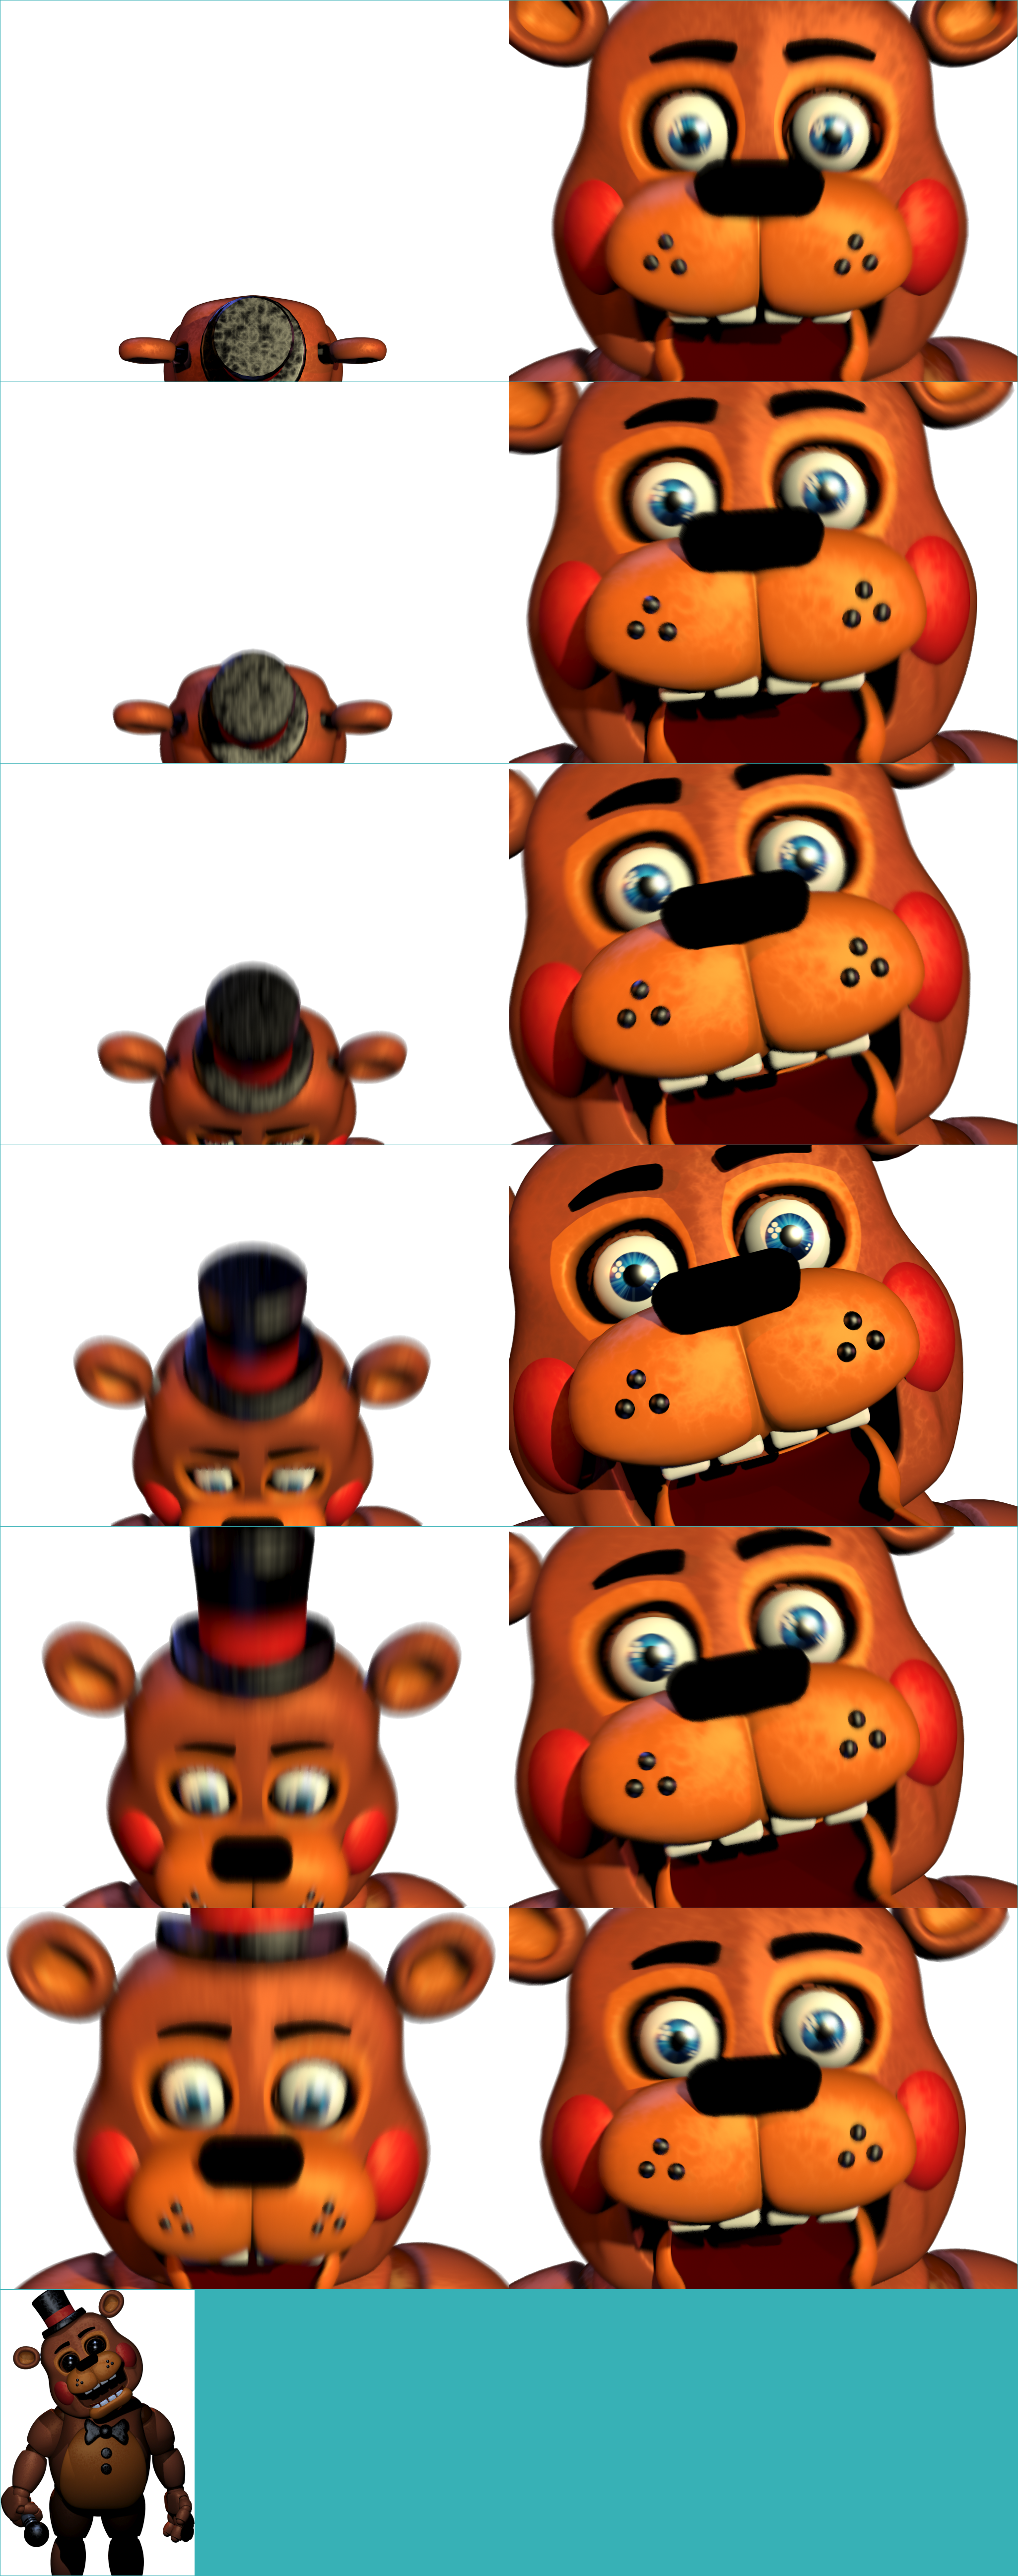 PC / Computer - Five Nights at Freddy's 2 - Toy Freddy - The Spriters  Resource